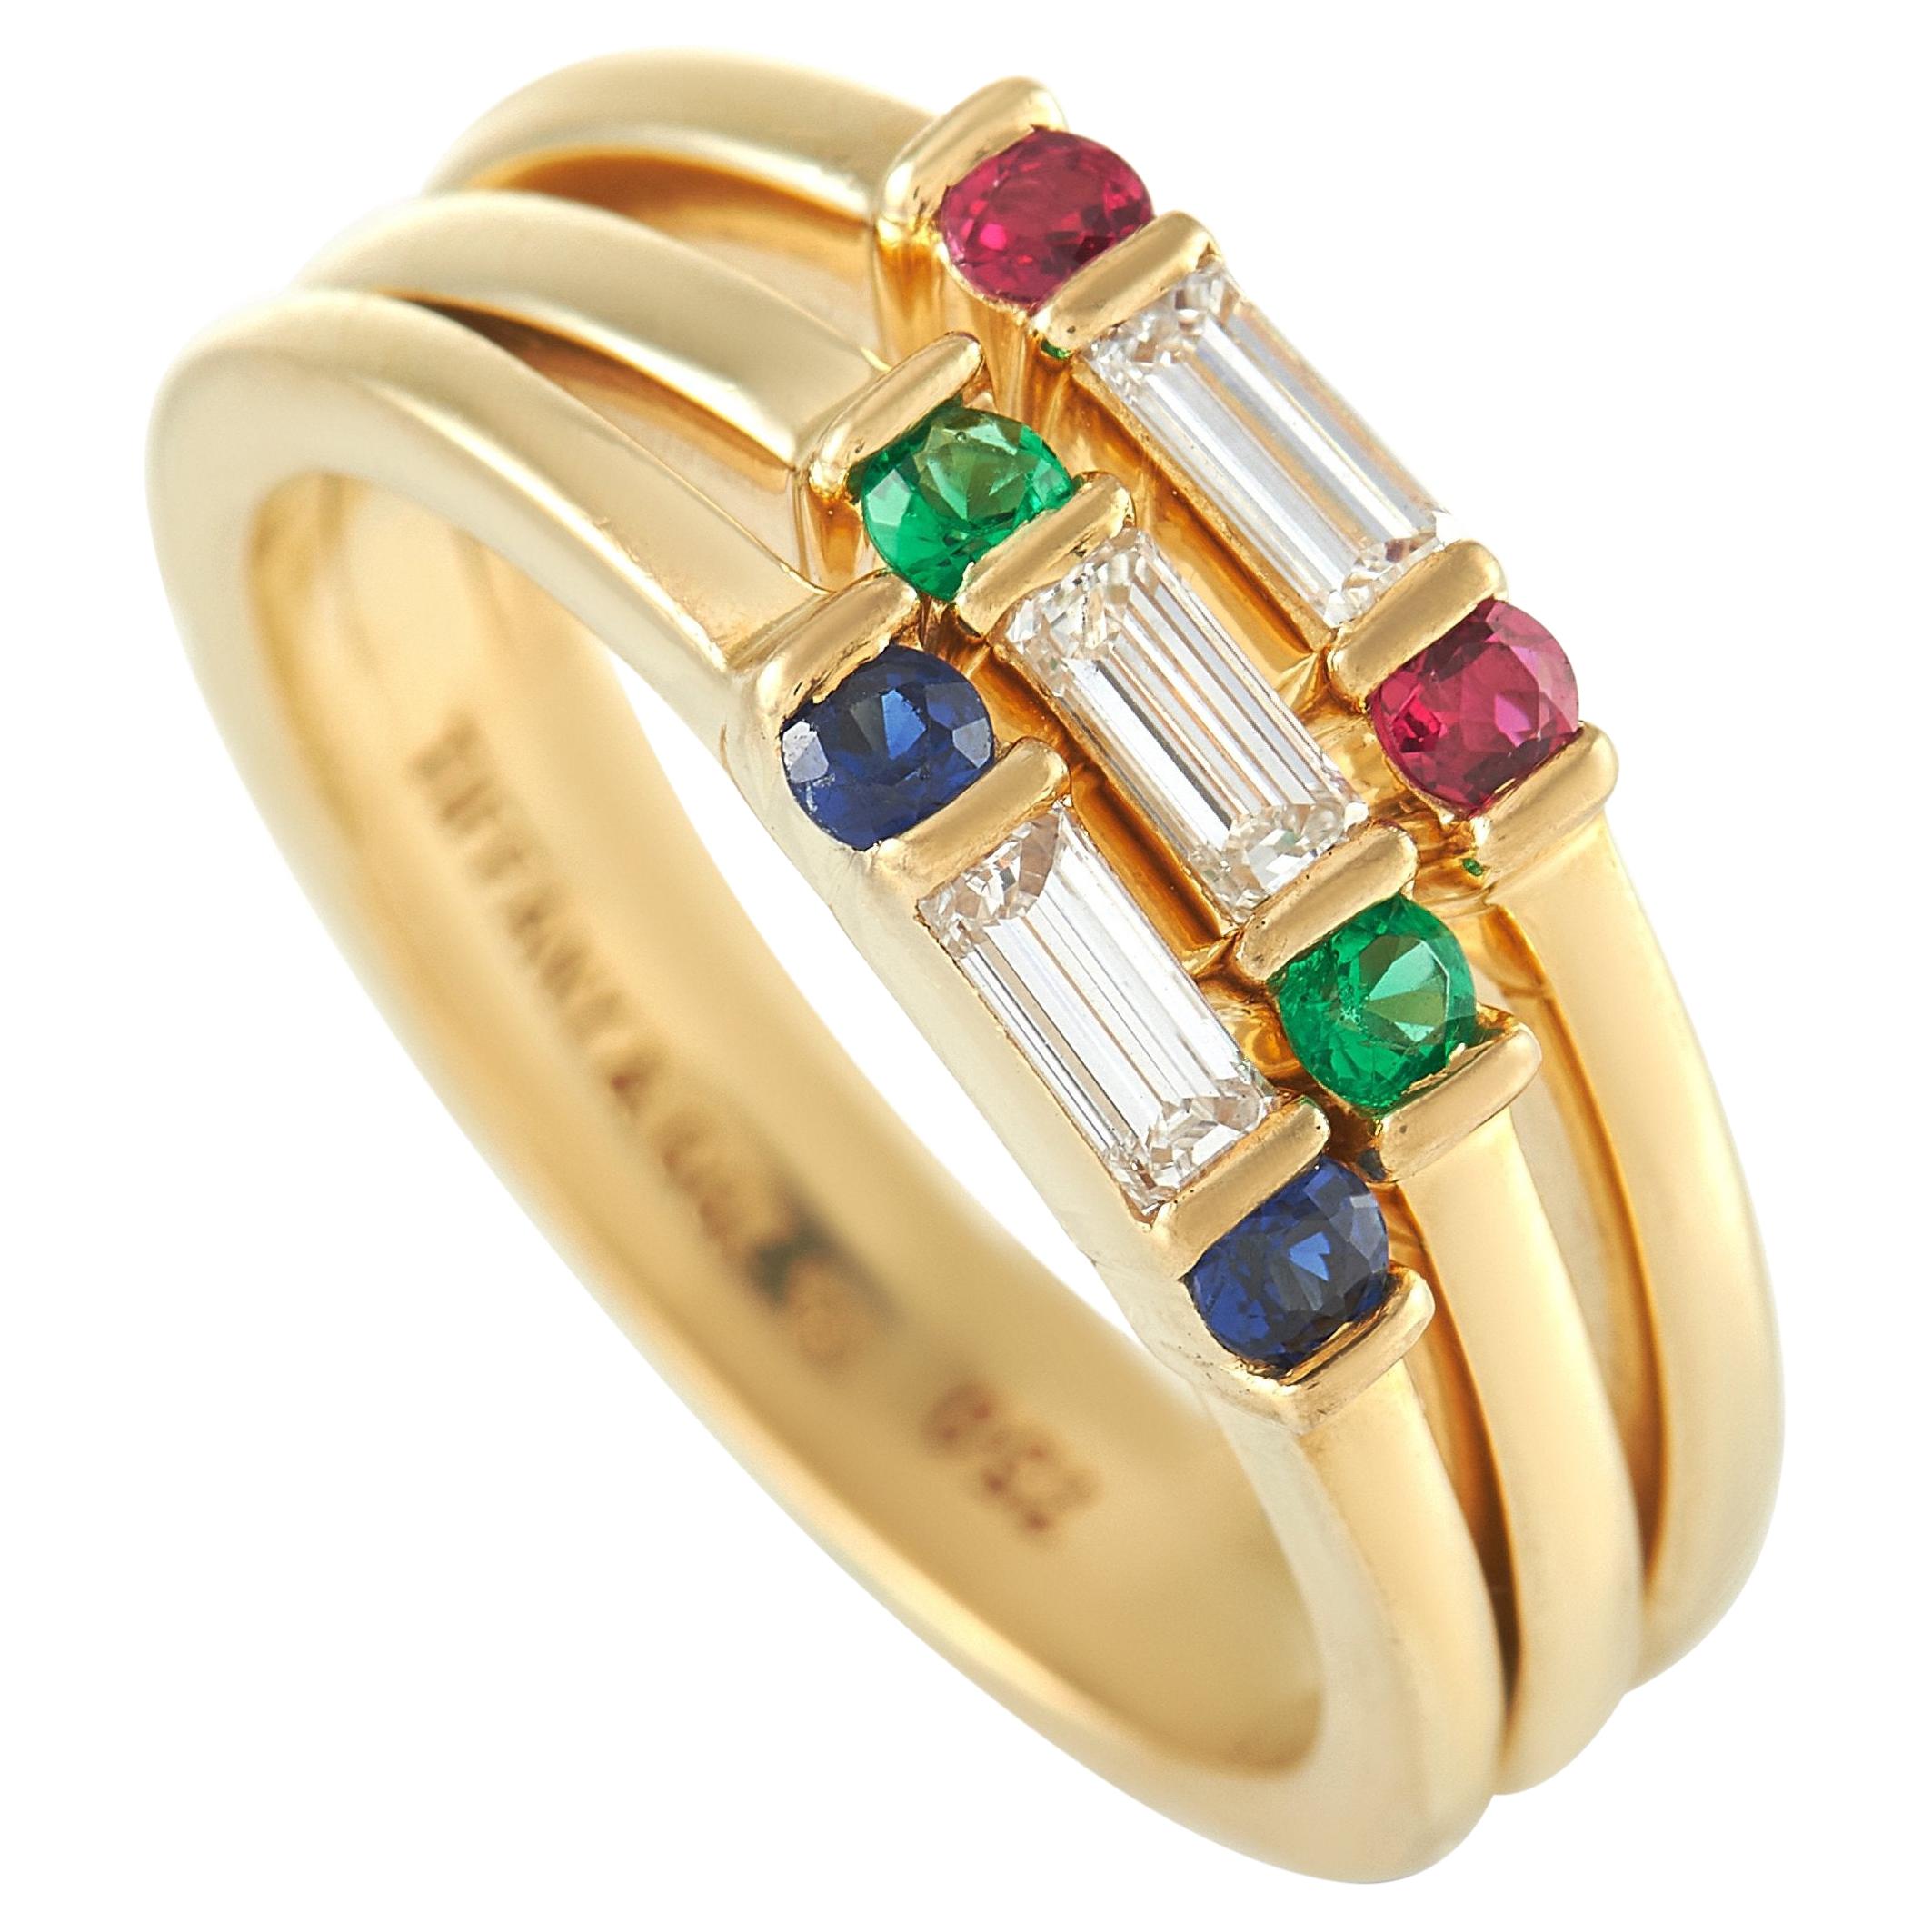 Tiffany & Co. 18K Yellow Gold 0.35 Ct Diamond, Ruby, Sapphire, and Emerald Ring